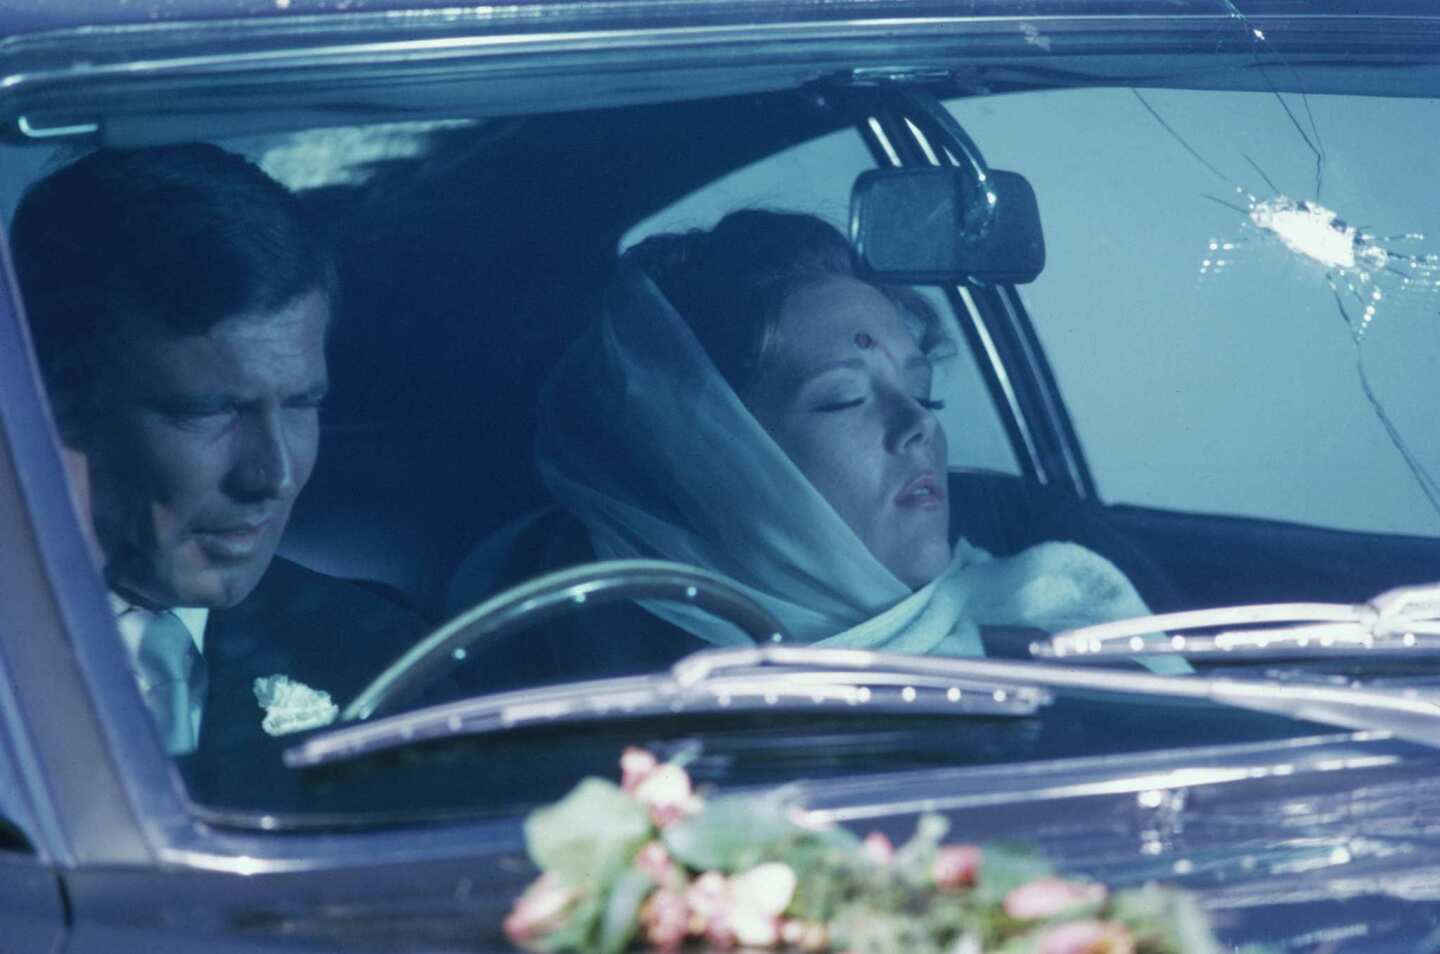 An Aston Martin DBS figures in what may be the most tragic scene in a 007 film. James Bond (George Lazenby) and his bride Tracy (Diana Rigg) are parked on the roadside after their wedding when they're shot at by henchwoman Irma Bunt from a car driven by nemesis Ernst Stavro Blofeld. Bond, thinking they've both survived the attack, climbs inside to find that Tracy has been killed.